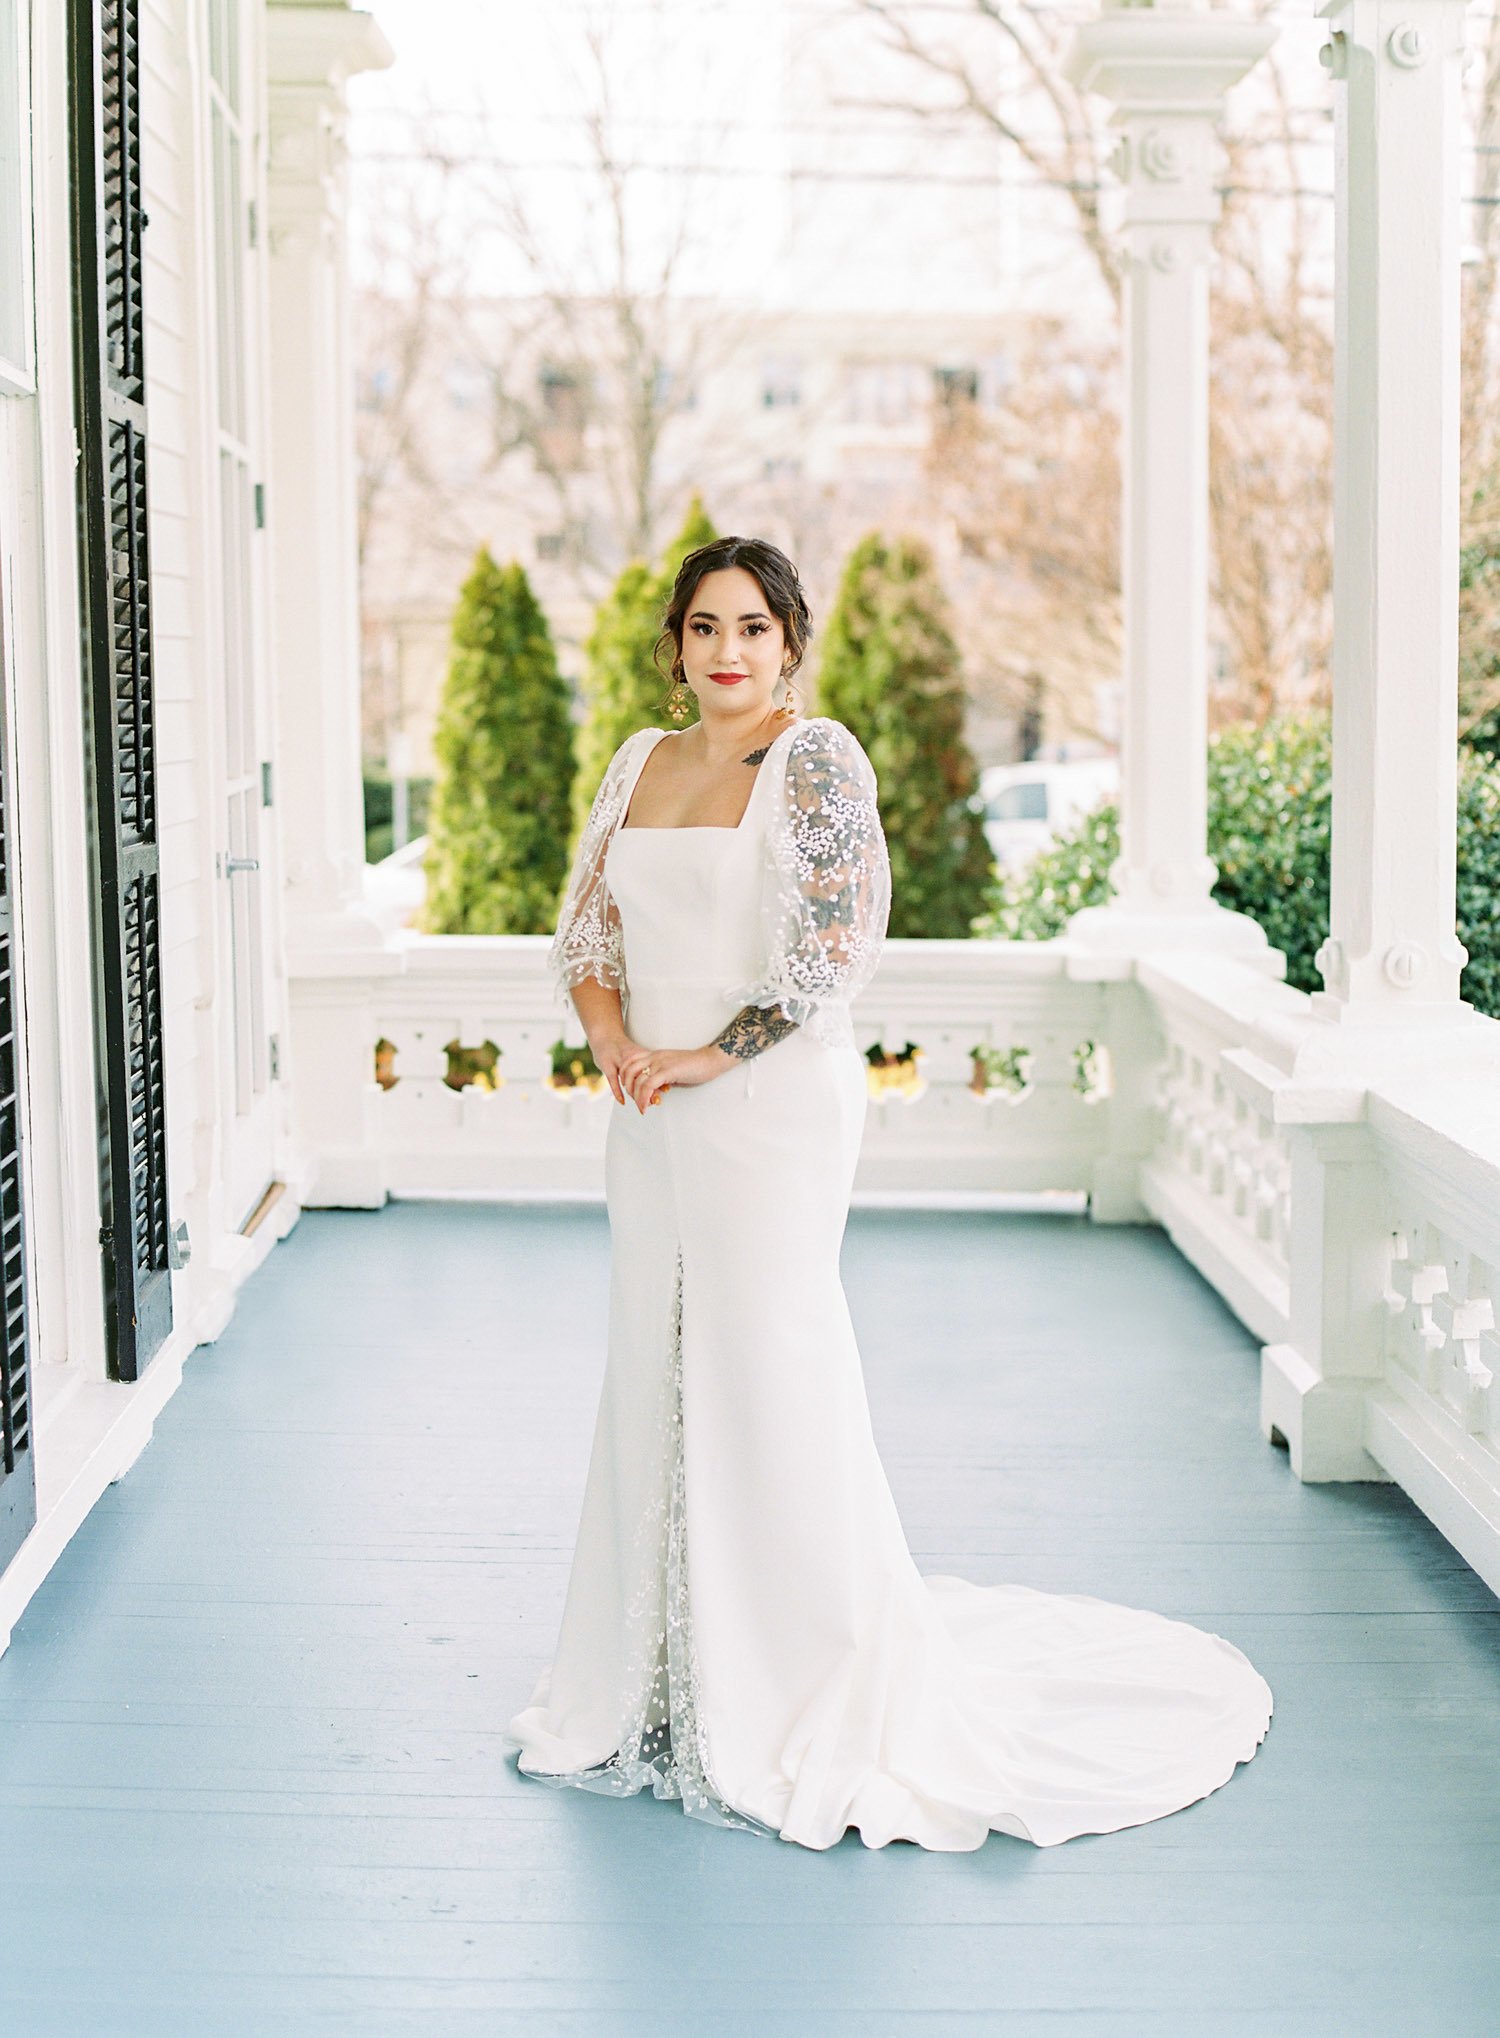  'florence' wedding dress by laudae bridal, a square neck fitted crepe bridal gown with sheer lace puff sleeves and a low back, photographed on the porch of the merrimon-wynne house in raleigh, north carolina    